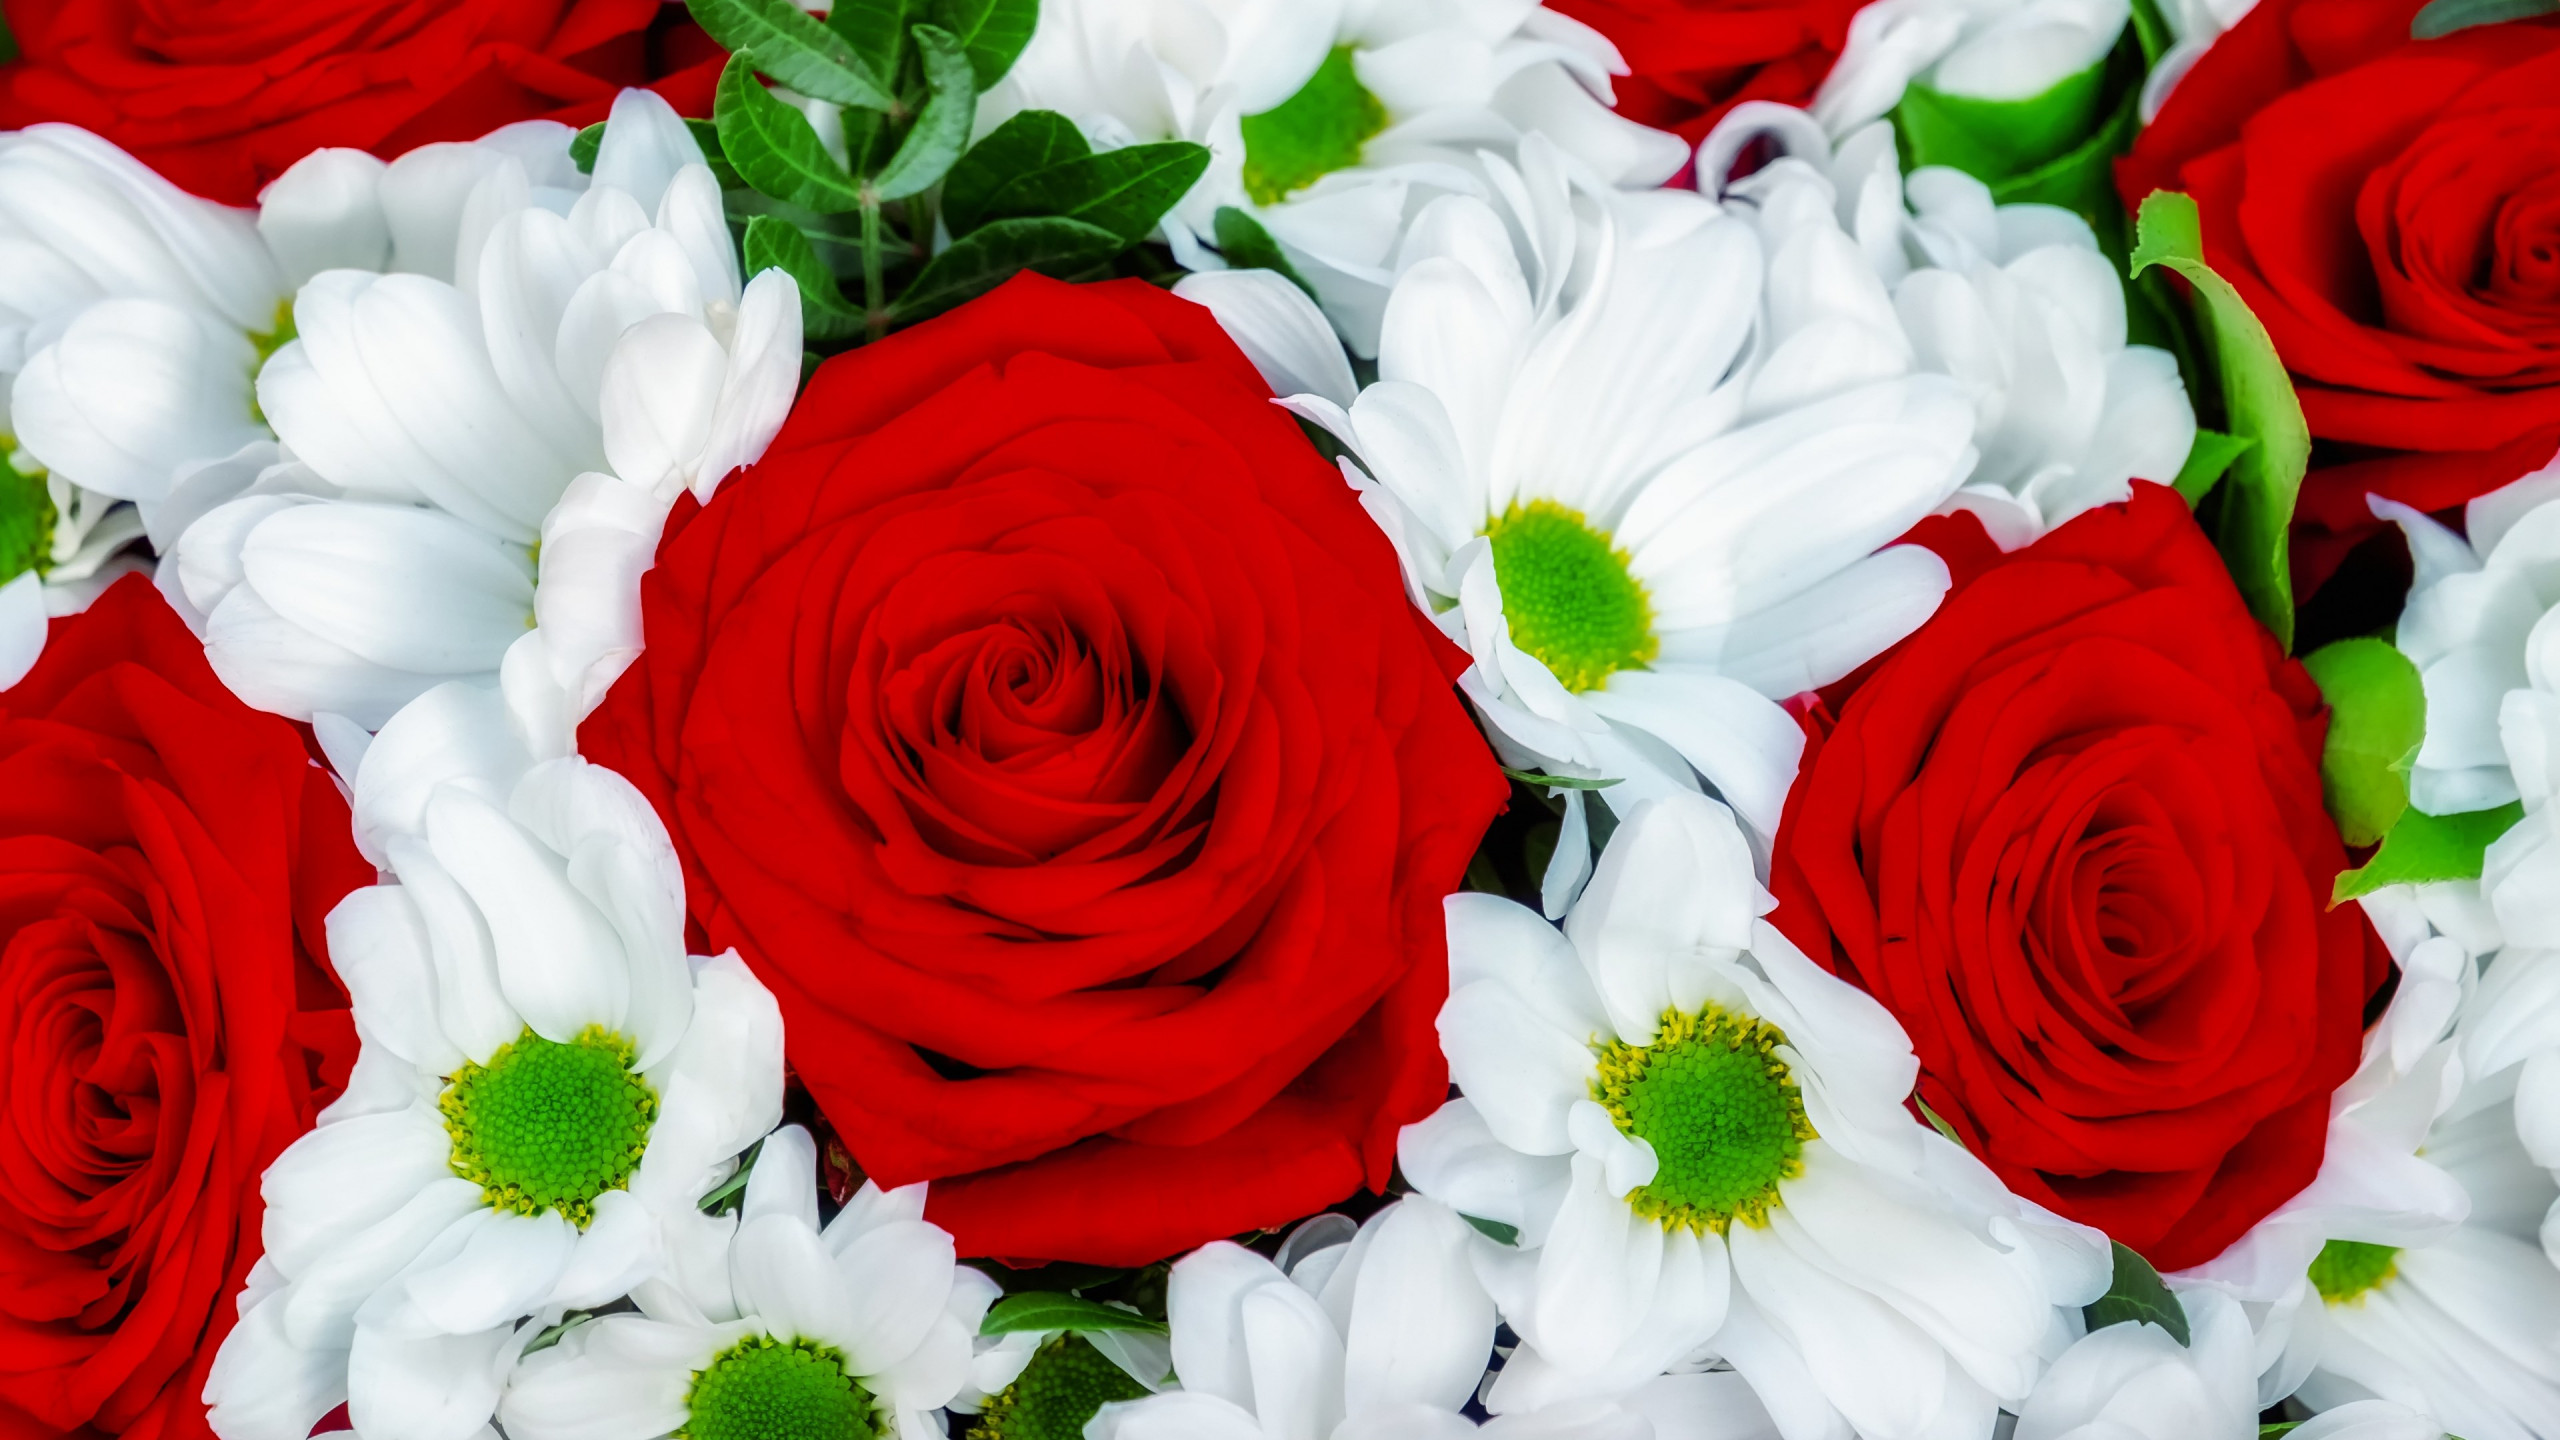 Roses and daisies bouquet wallpaper 2560x1440